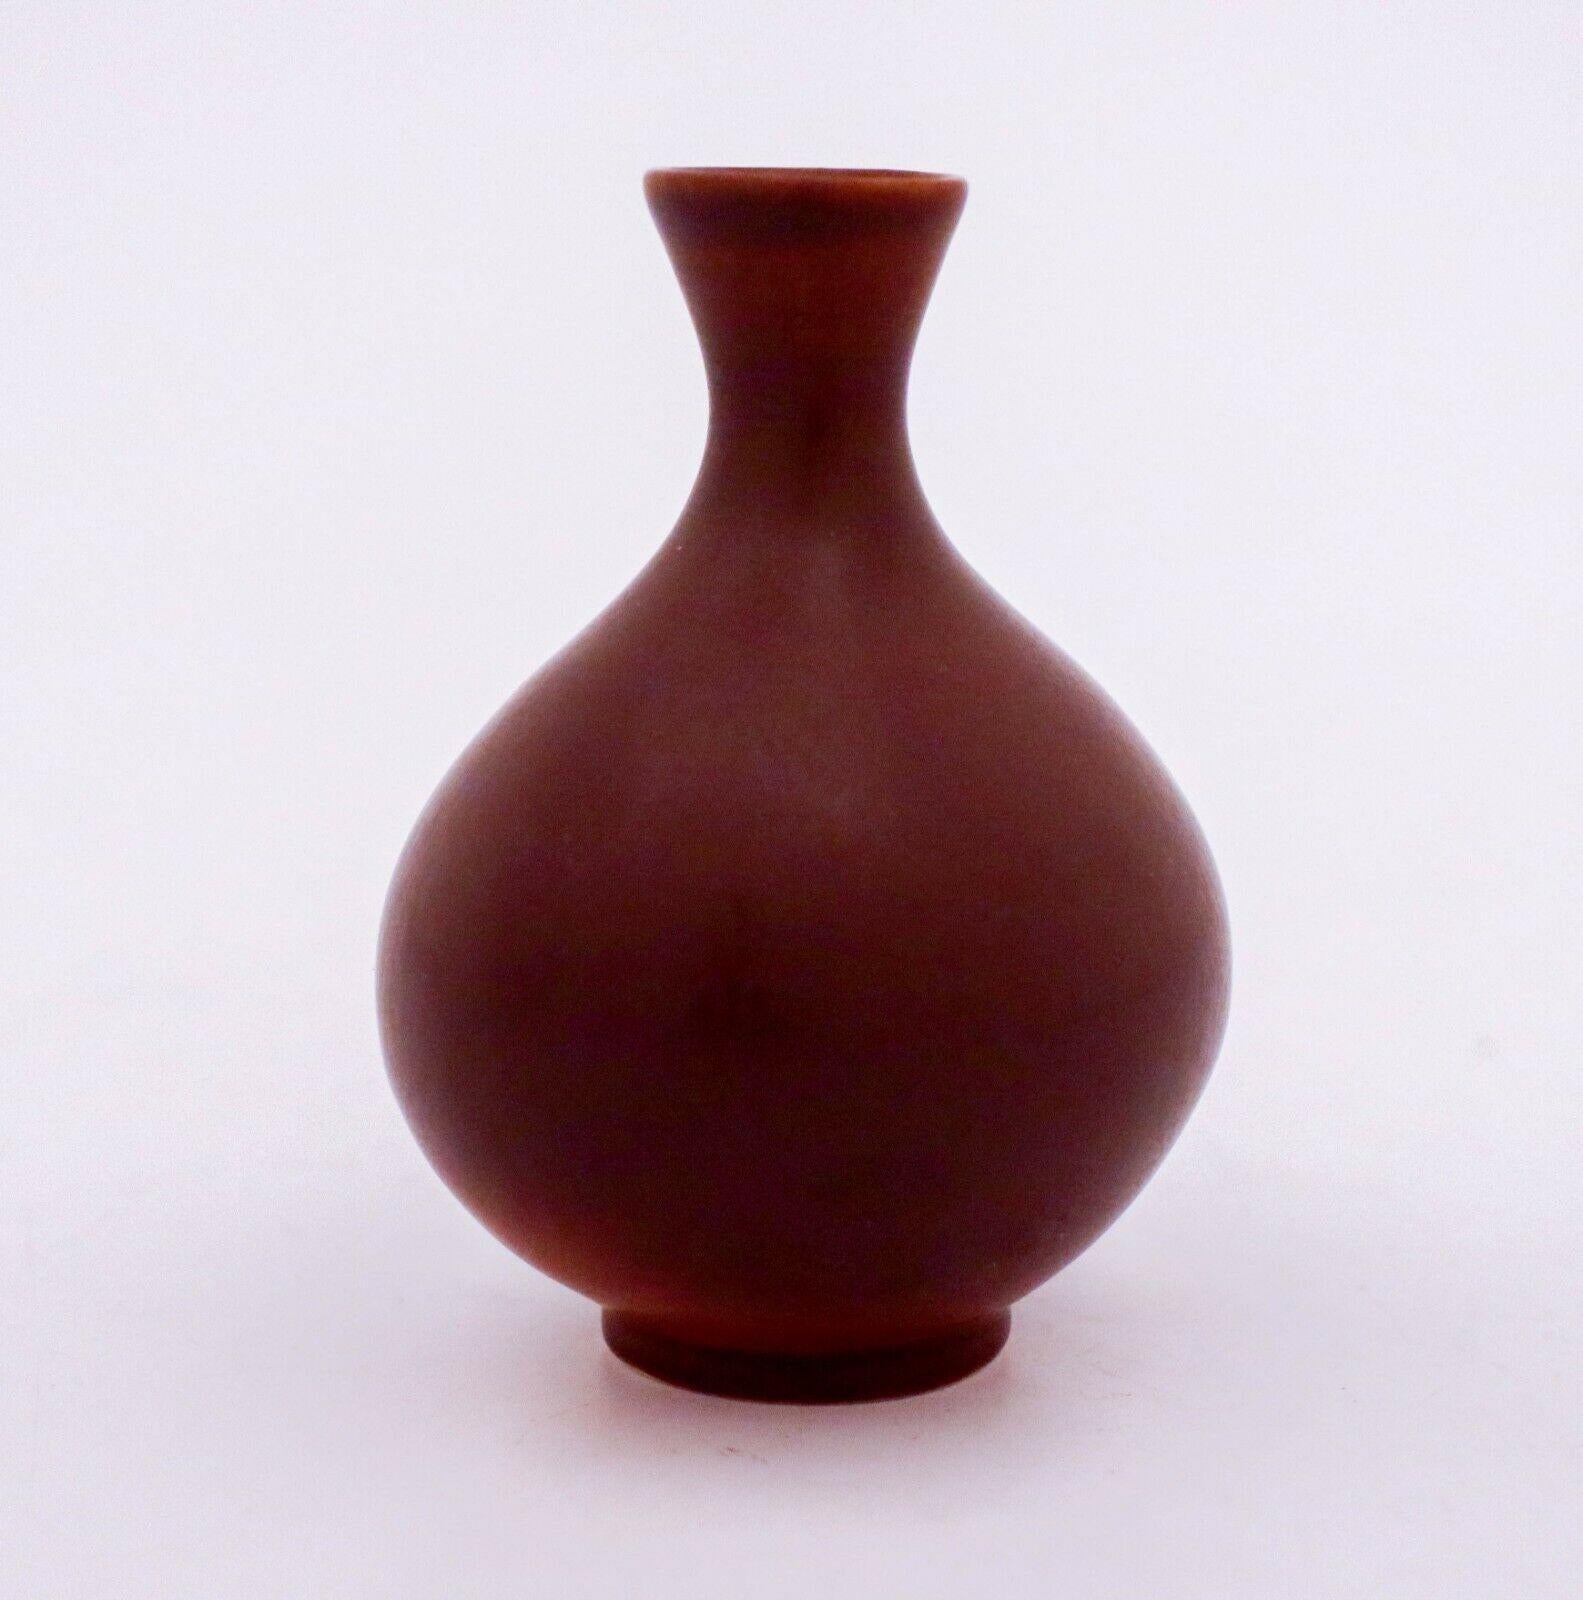 A brown vase designed by Berndt Friberg at Gustavsberg in Stockholm, the vase is 8 cm high. It is in the Selecta serie and it is in mint condition.